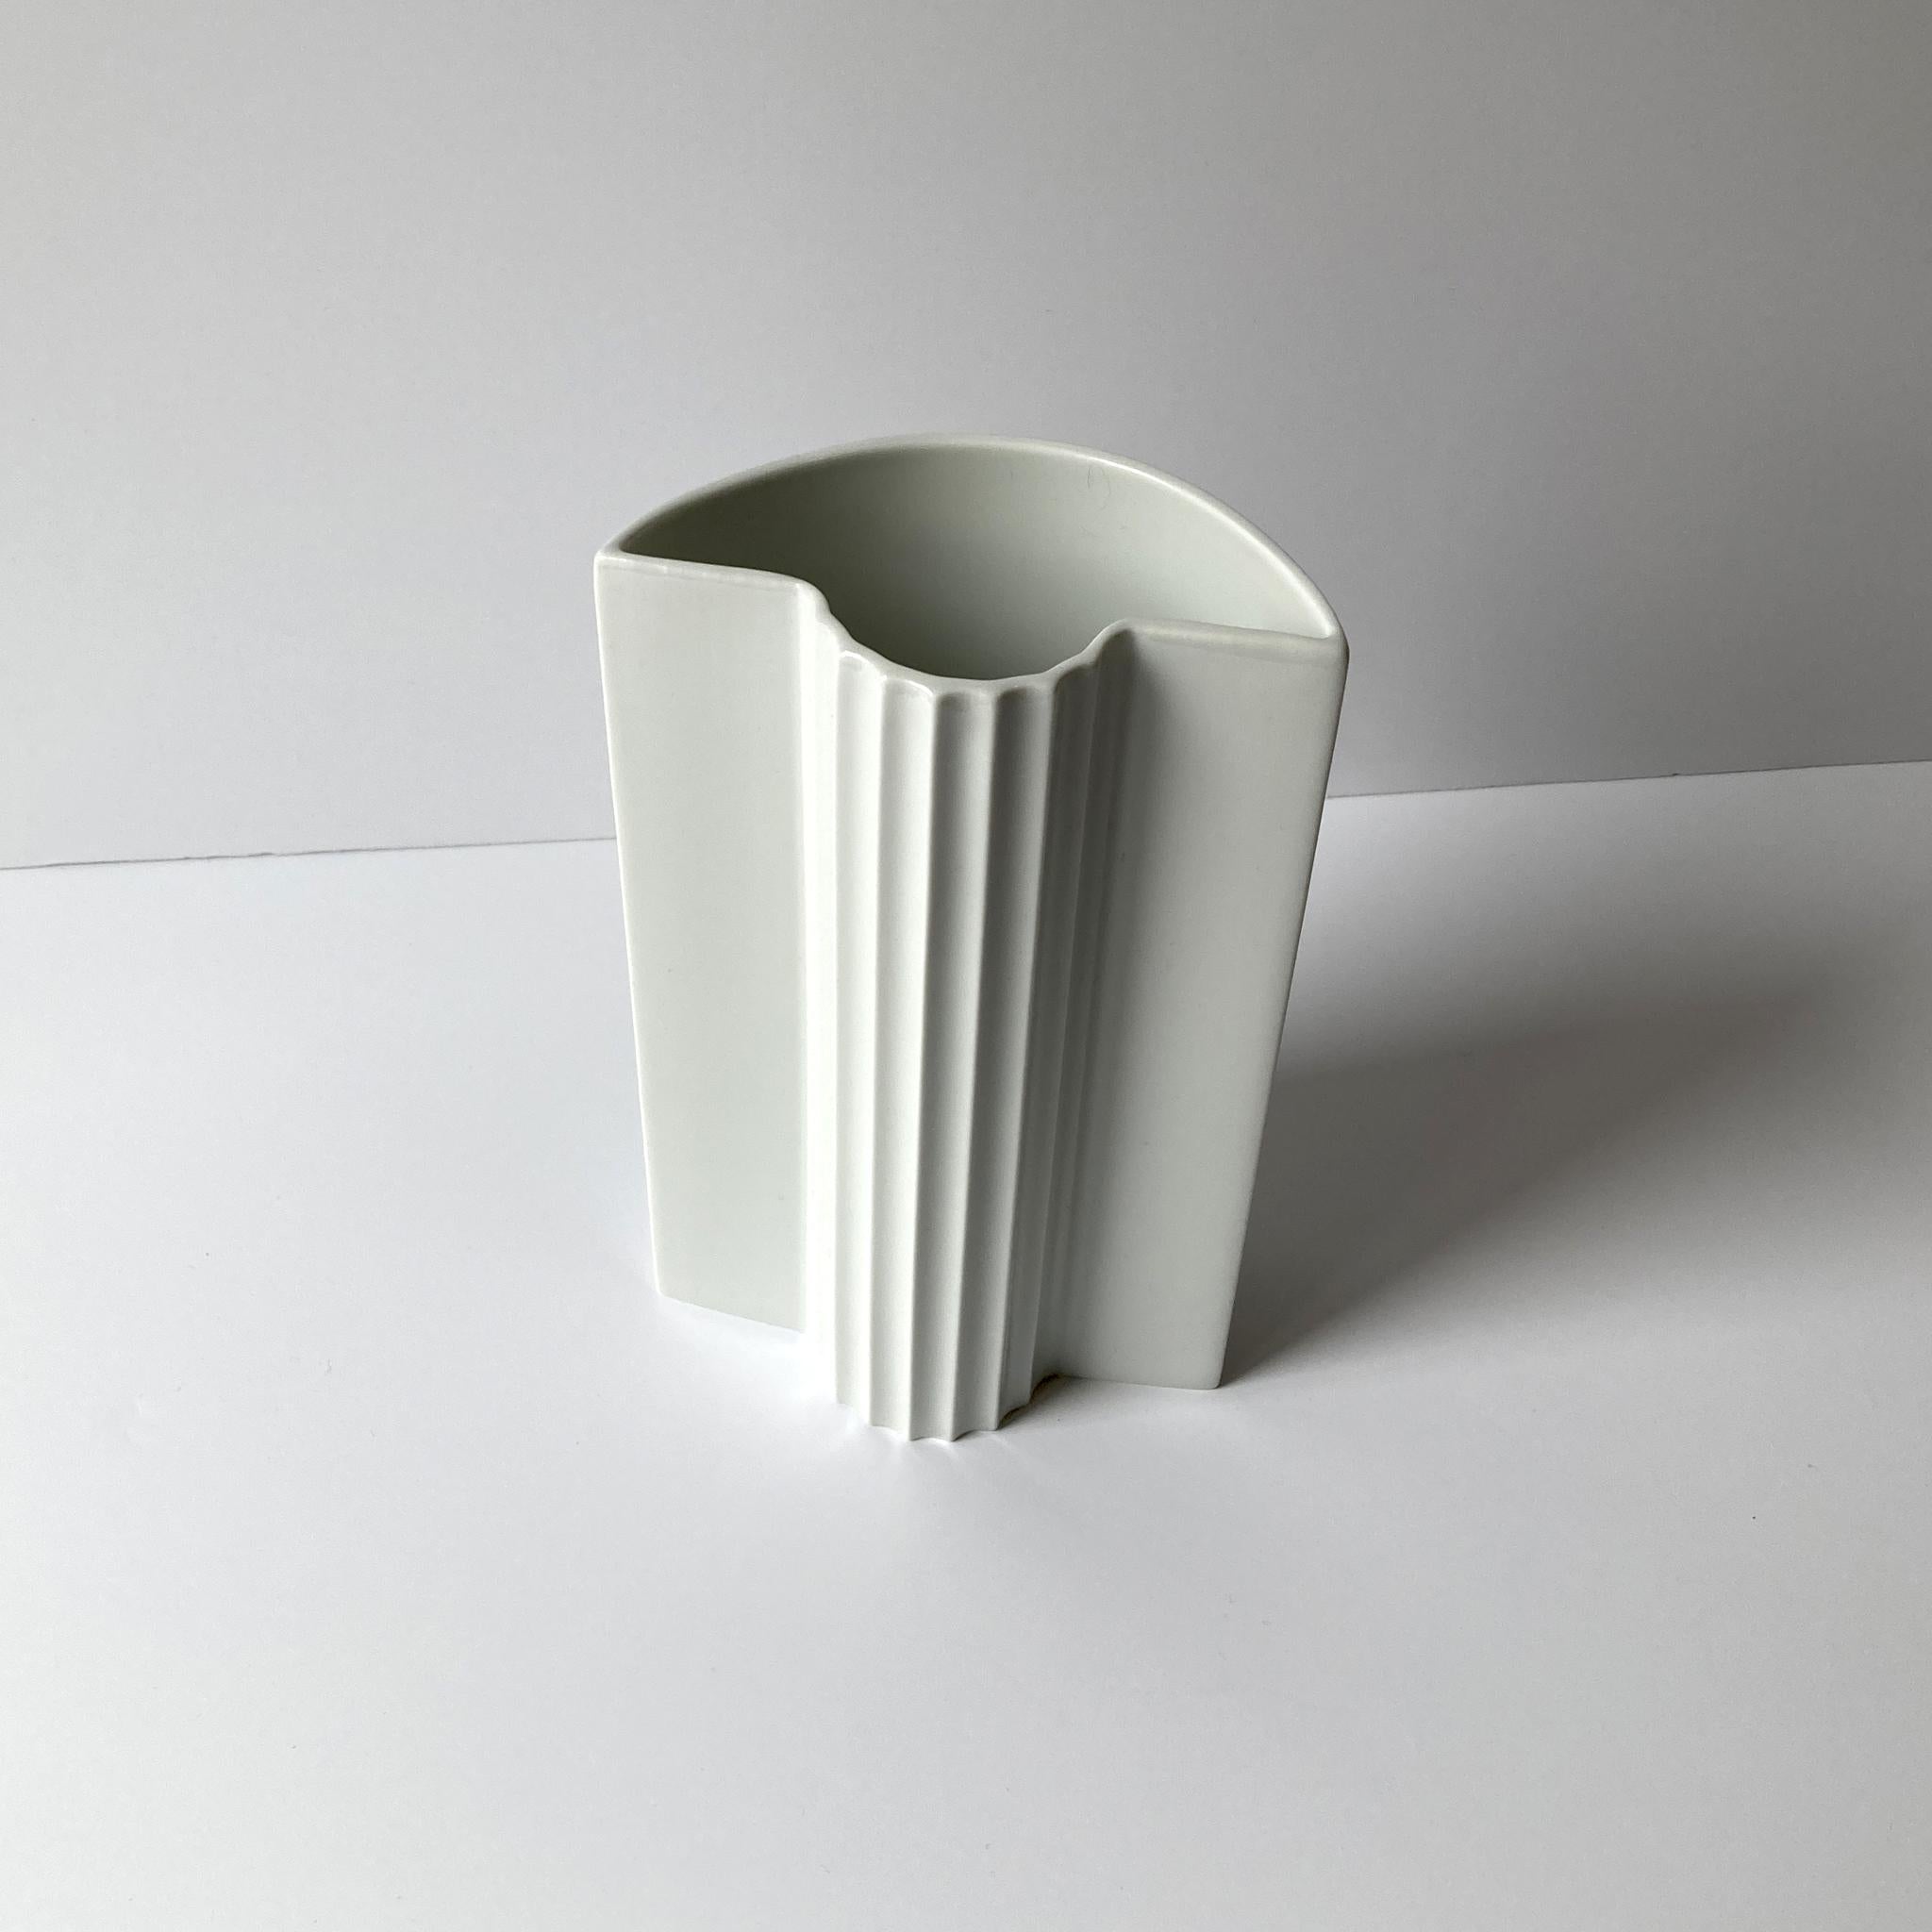 Thomas Keramik White Rounded Porcelain Vase, Postmodern In Good Condition For Sale In New York, NY